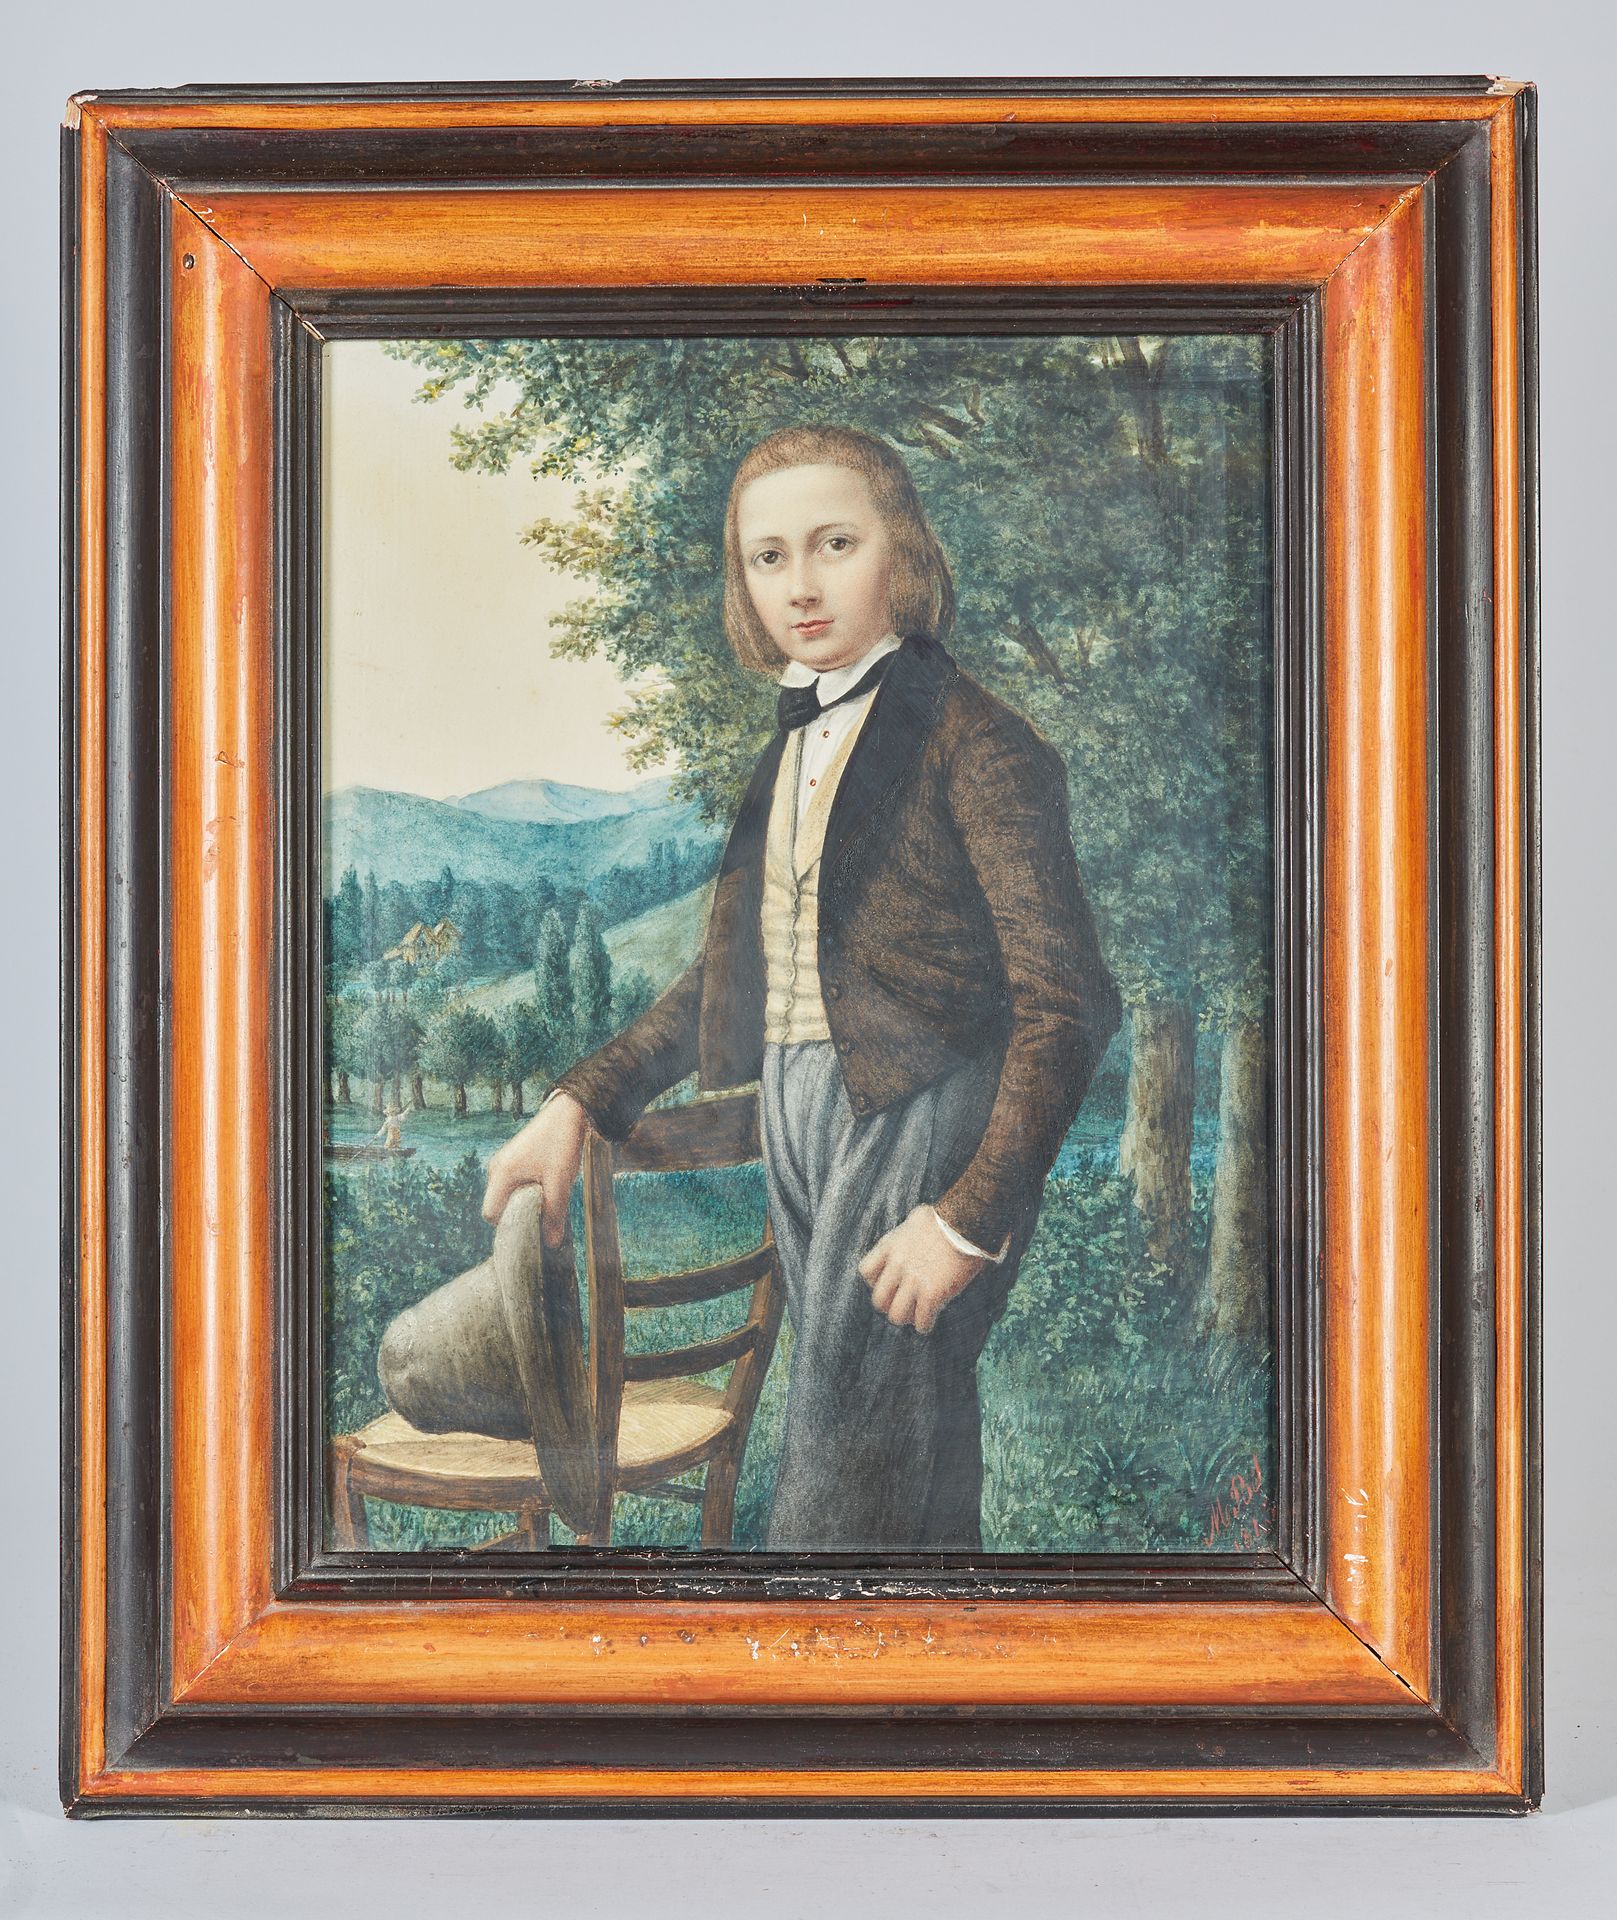 Null German school of the 19th century

Portrait of a young man with a chair

Wa&hellip;